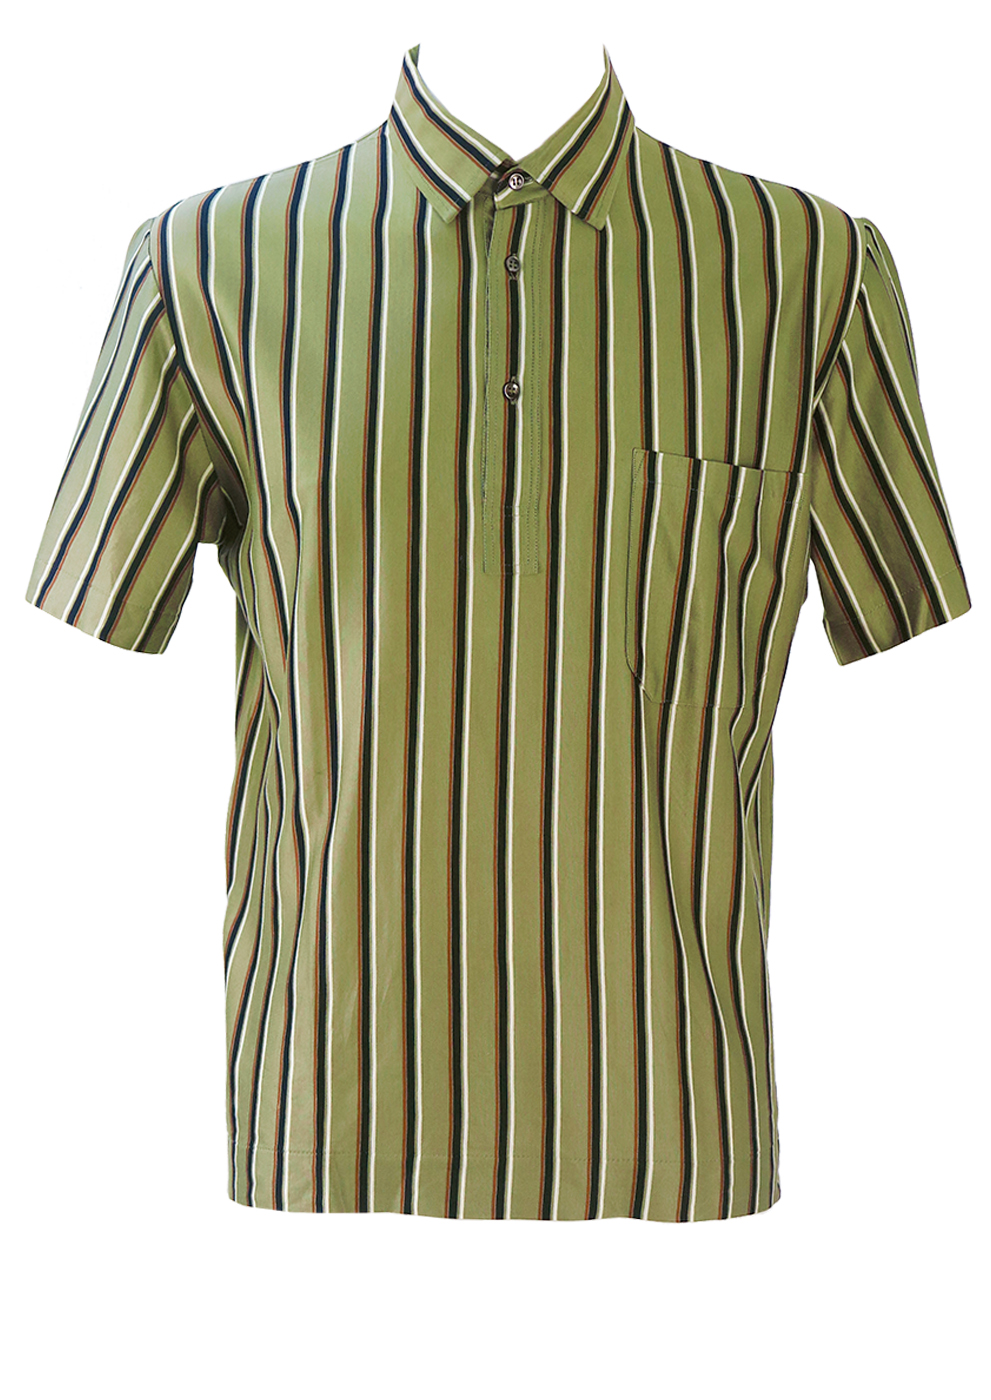 Olive Green Italian Mod Polo Shirt with Navy Blue, Brown & White ...